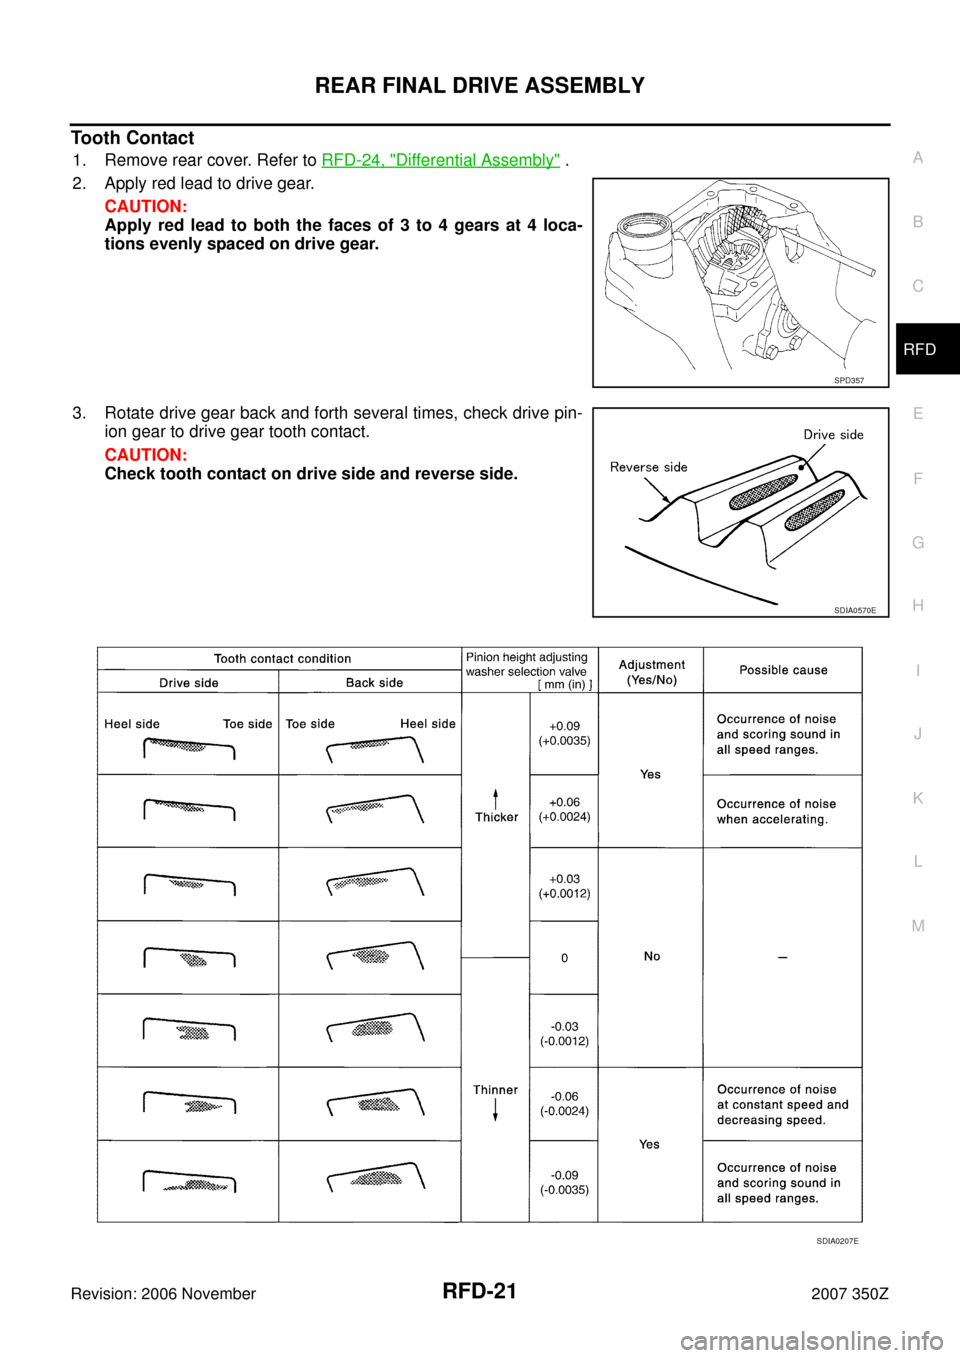 NISSAN 350Z 2007 Z33 Rear Final Drive Workshop Manual REAR FINAL DRIVE ASSEMBLY
RFD-21
C
E
F
G
H
I
J
K
L
MA
B
RFD
Revision: 2006 November2007 350Z
Tooth Contact
1. Remove rear cover. Refer to RFD-24, "Differential Assembly" .
2. Apply red lead to drive g